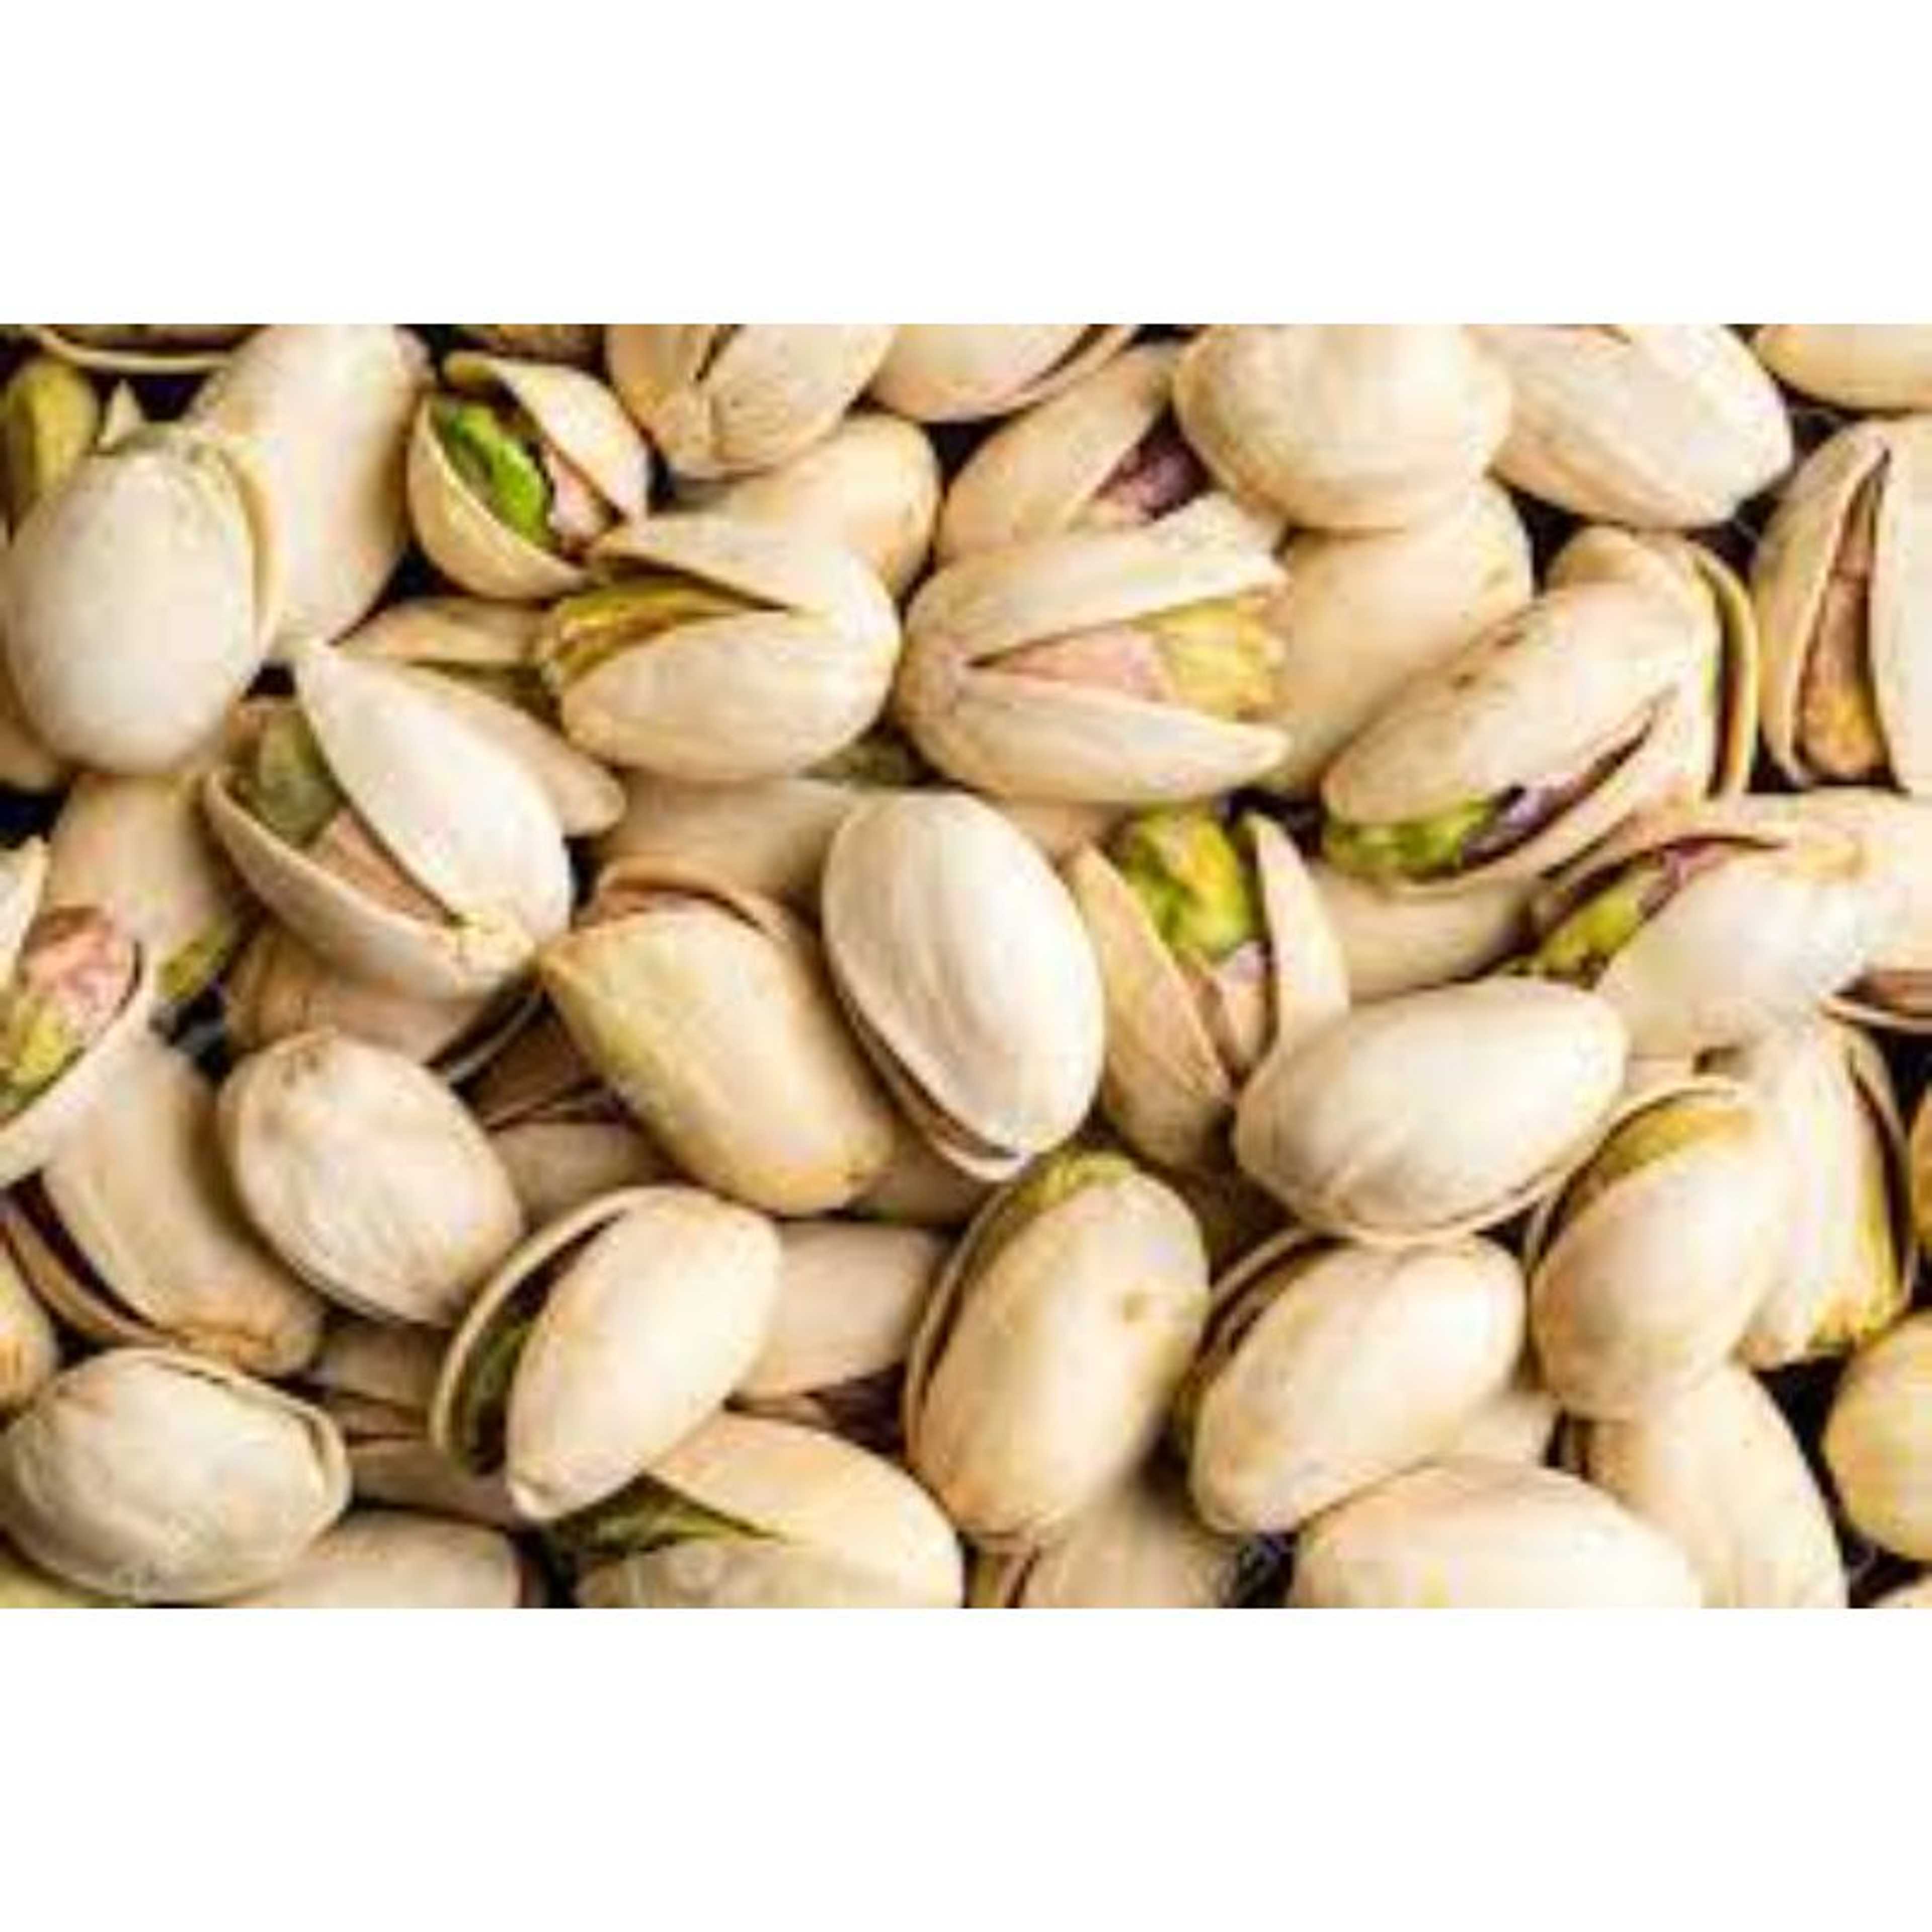 Salted pistachios